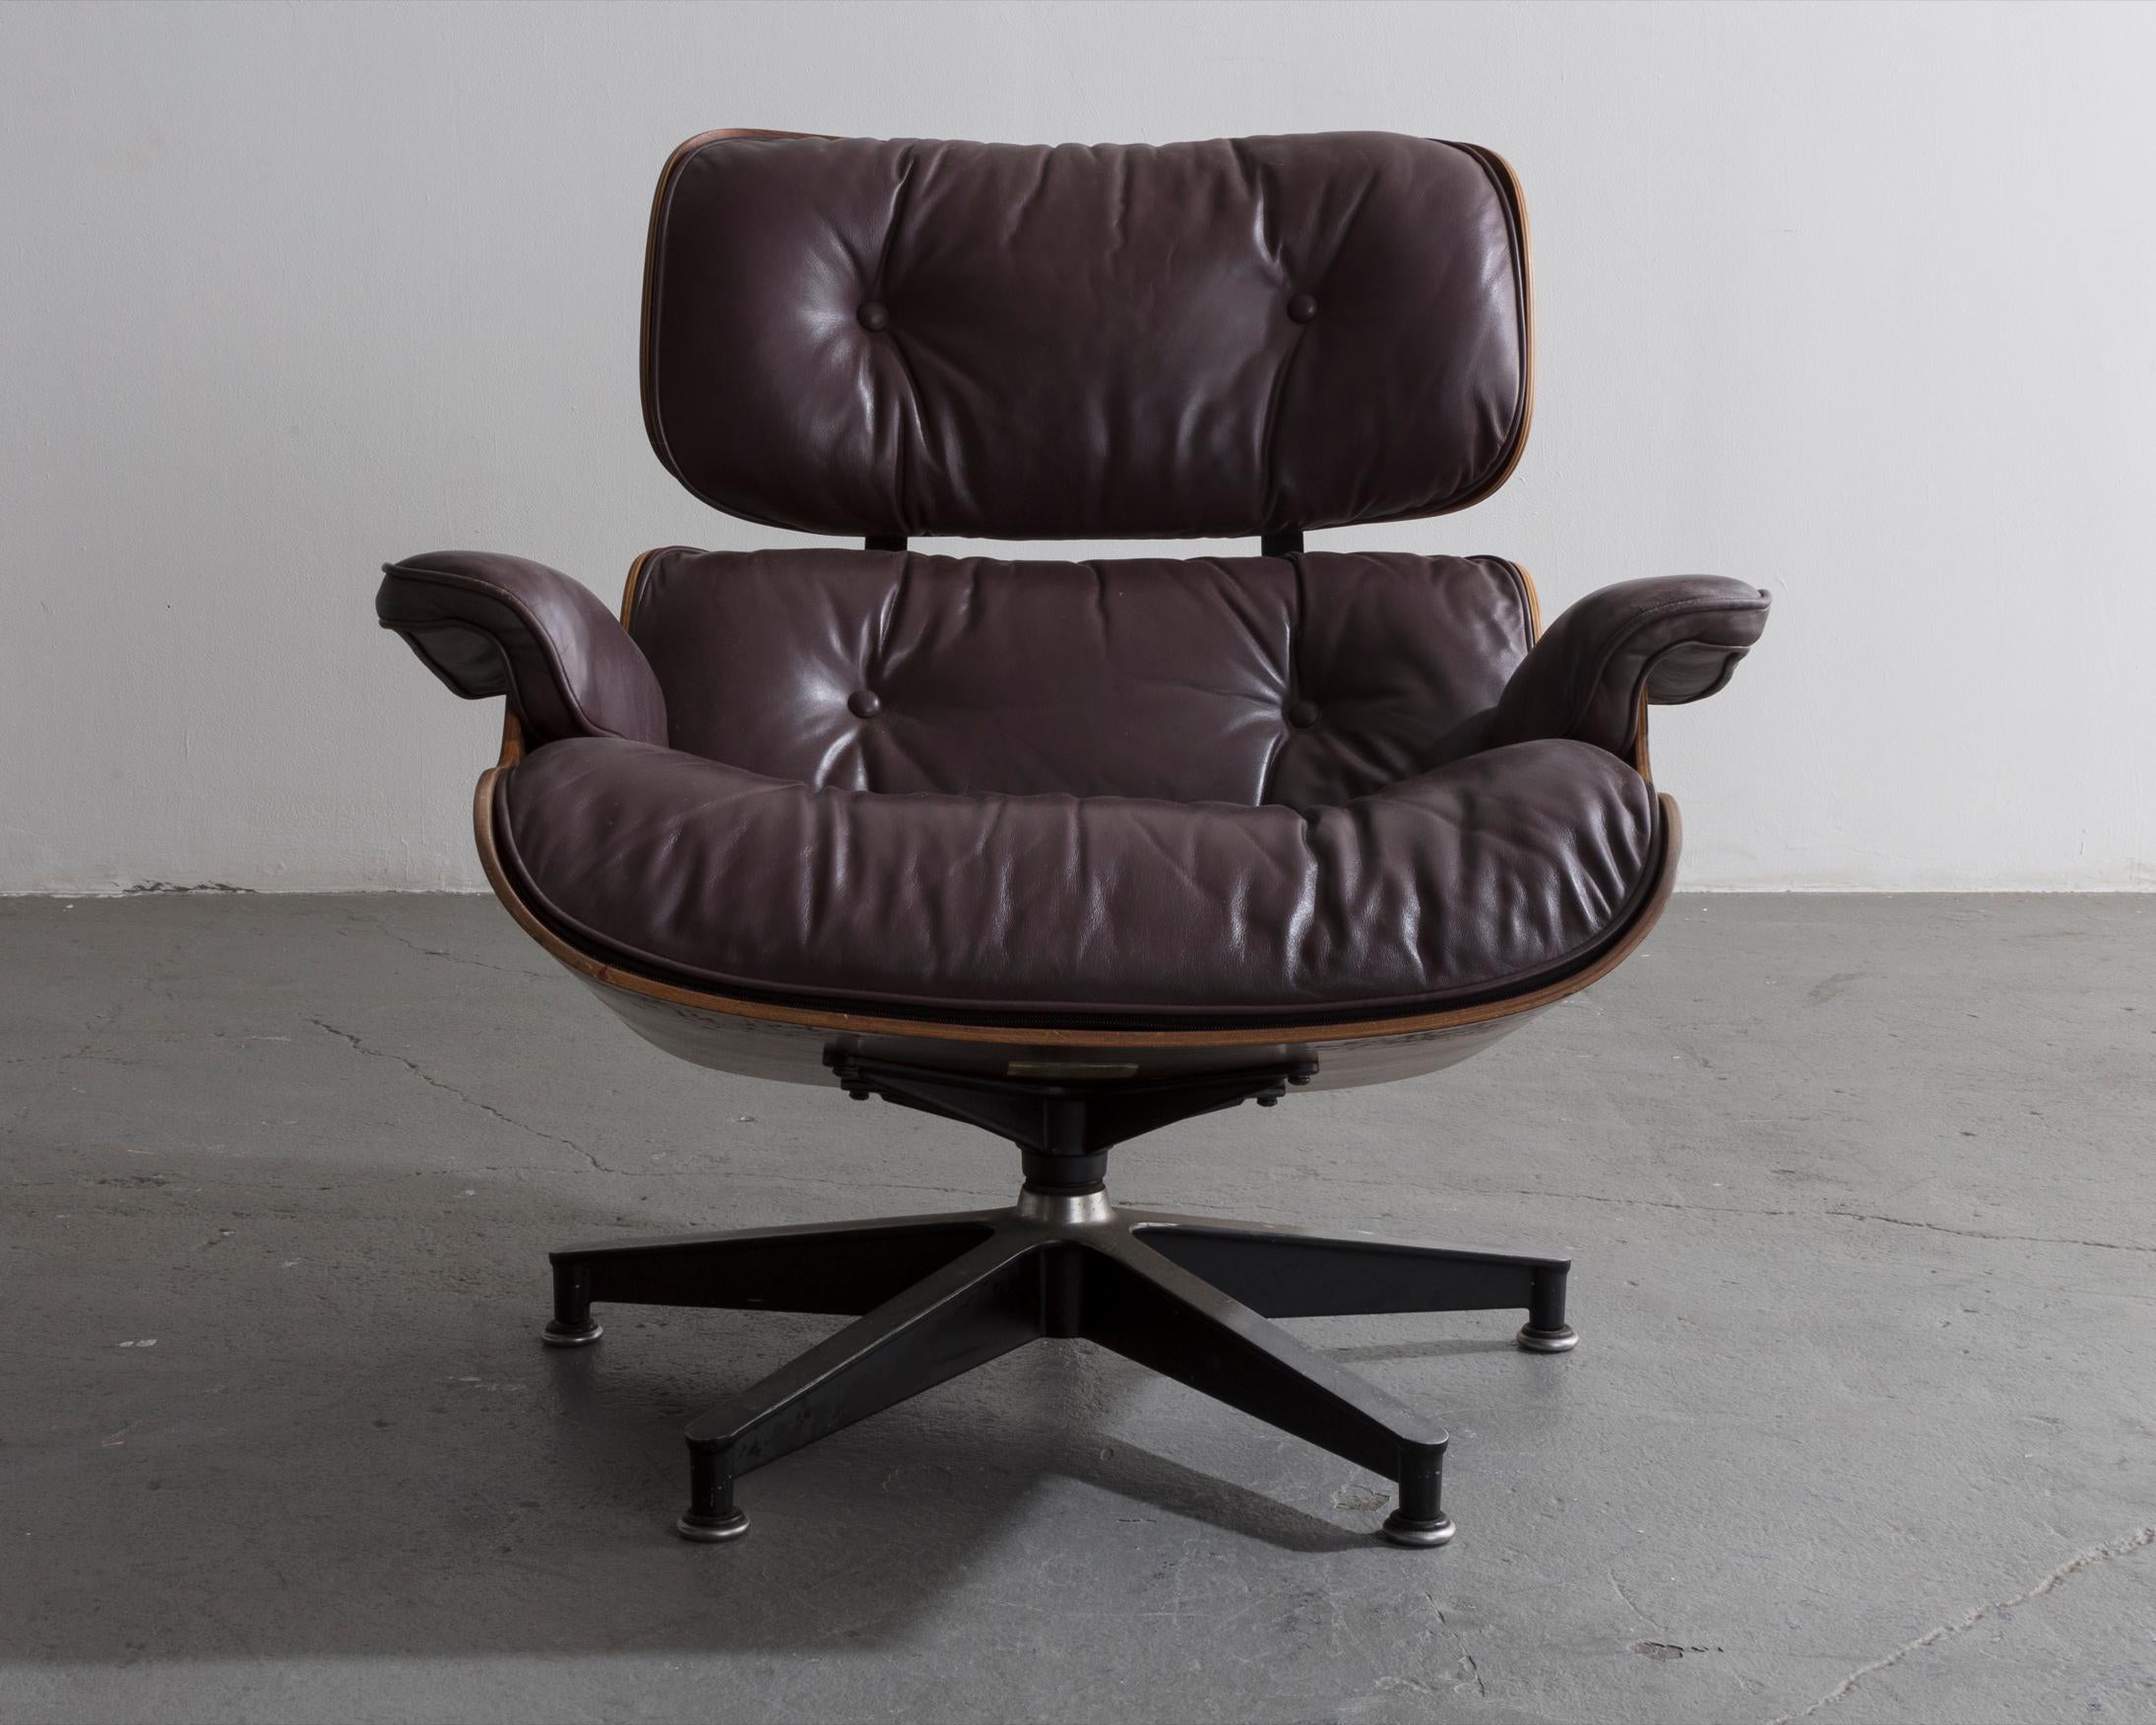 670 lounge chair and ottoman in rosewood with aubergine leather upholstery. Designed by Charles and Ray Eames for Herman Miller, USA, 1958.
   